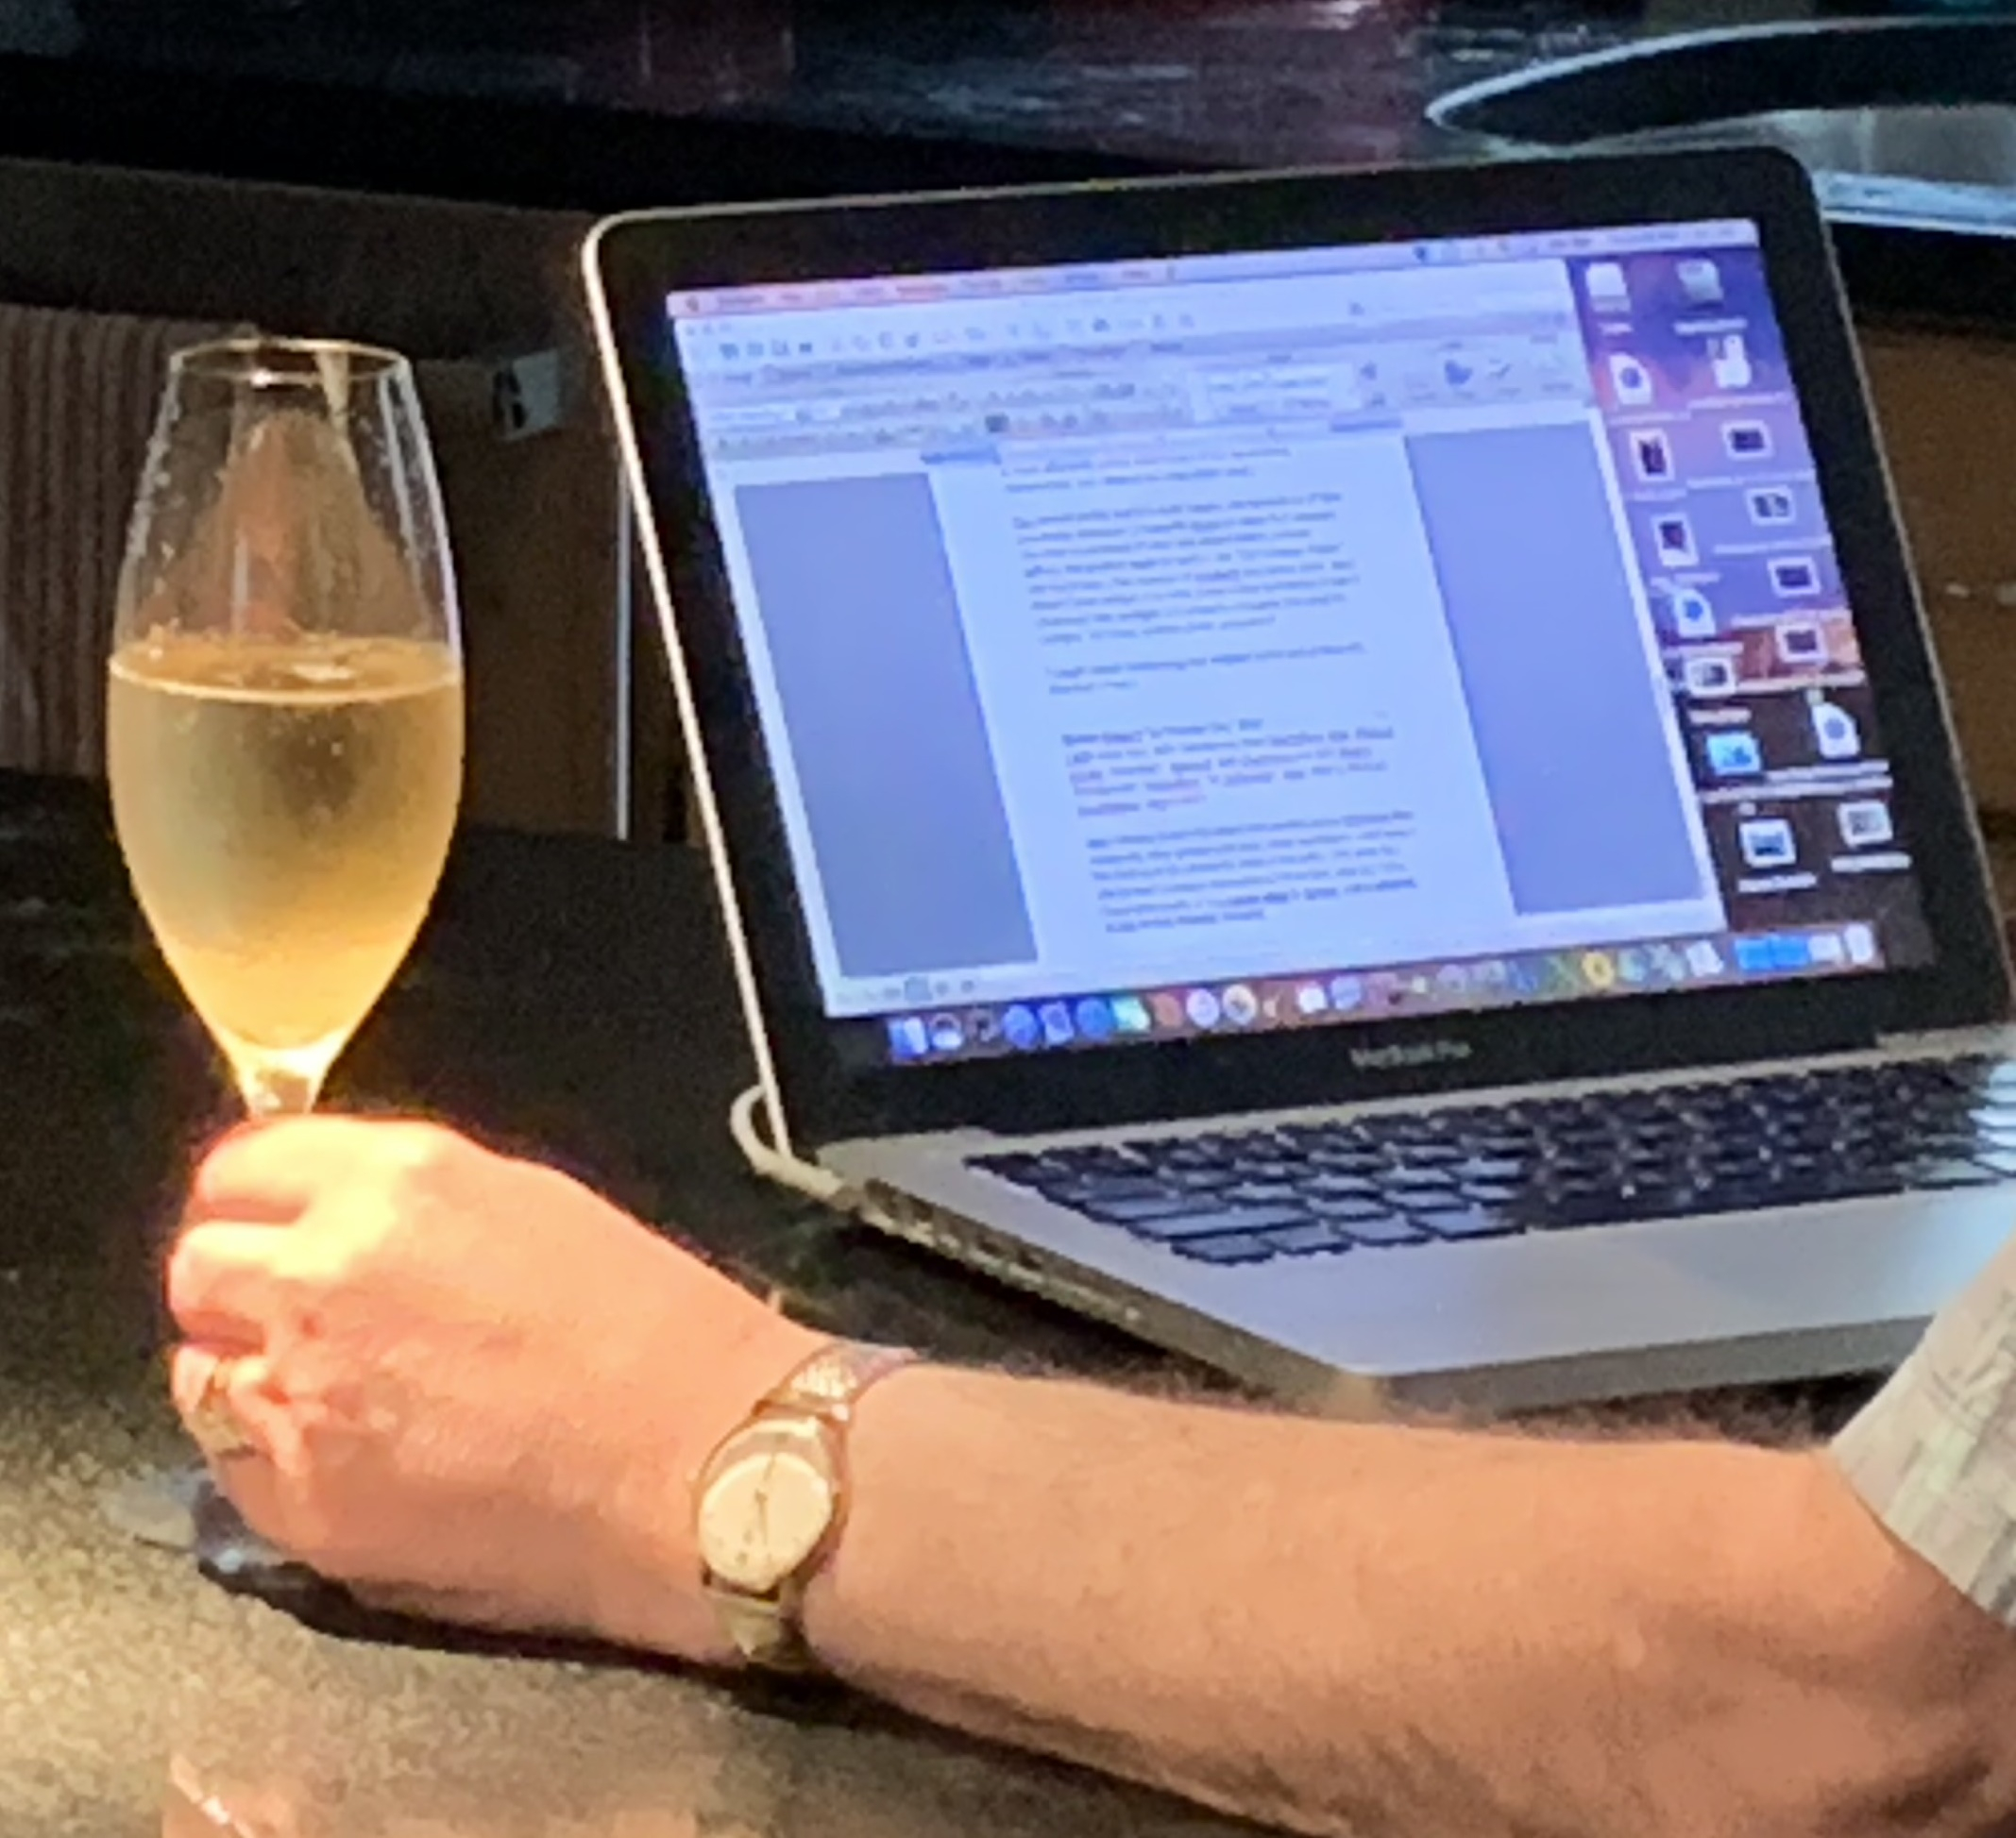 drinking Champagne in front of the computer